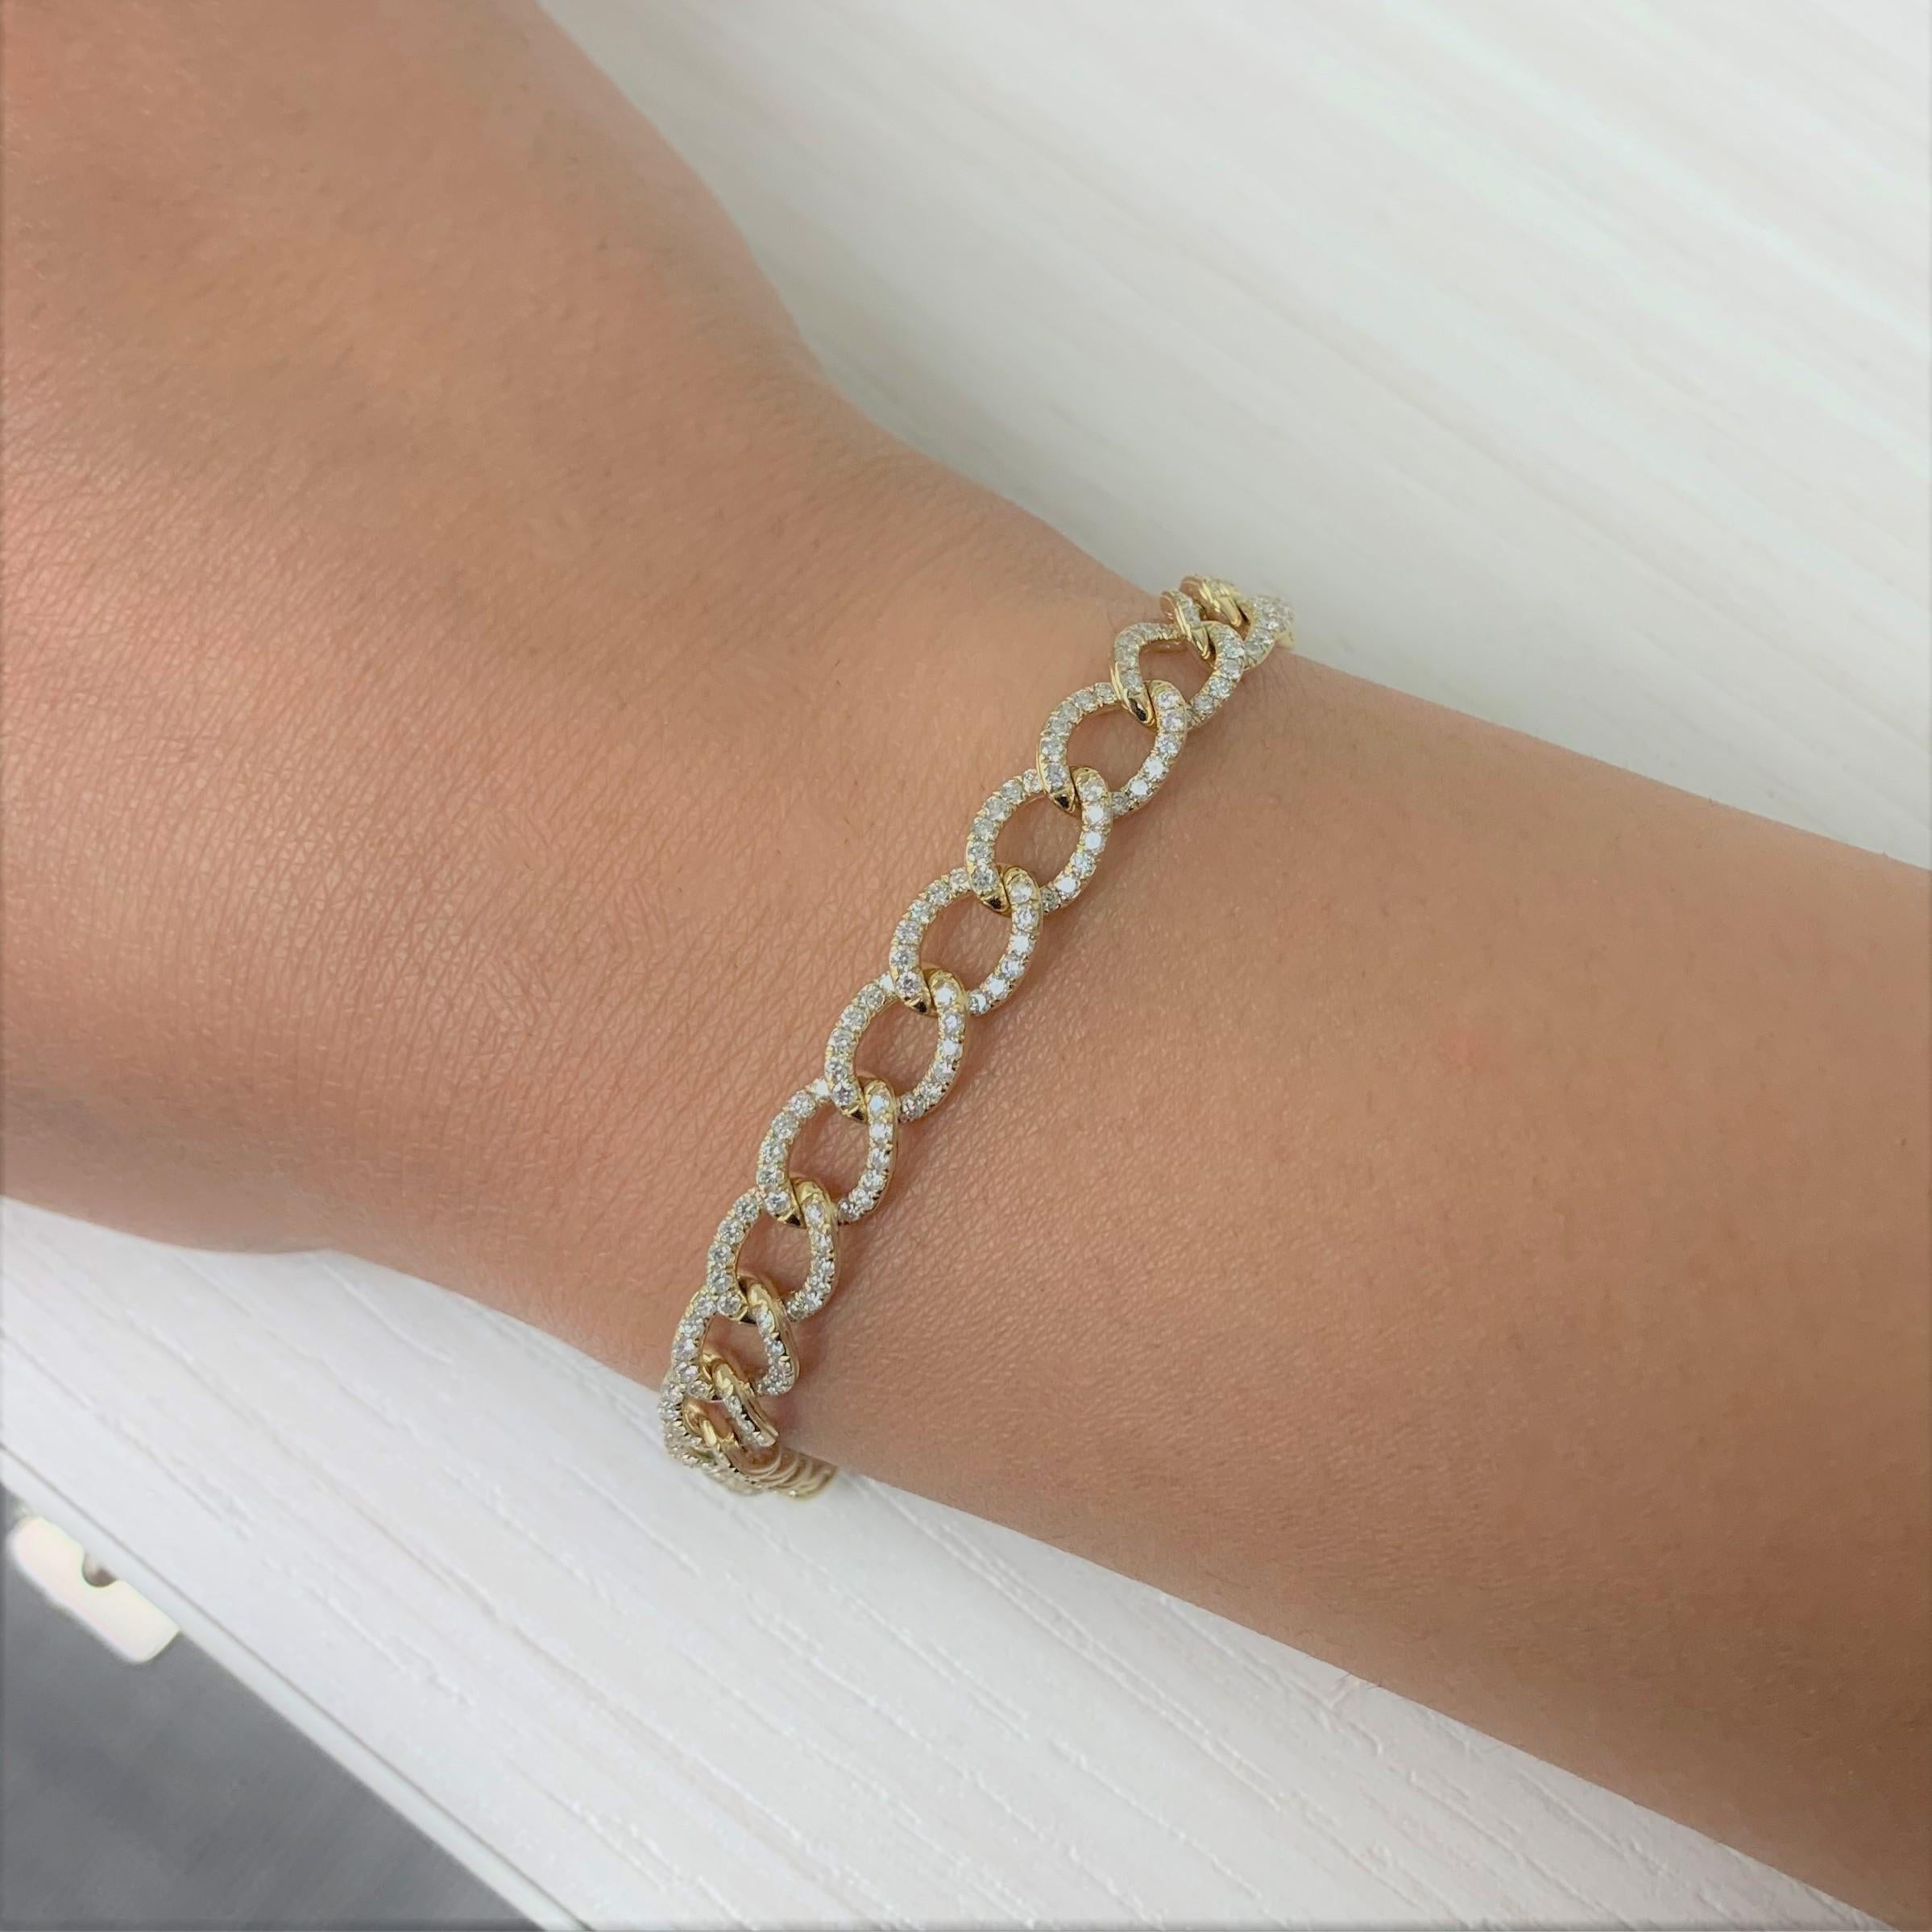 This Stunning and Heavy Diamond Link Bracelet is crafted of 14K Yellow Gold, featuring Round Diamonds 2.85 ct., Diamond Color and Clarity is GH-SI1. 7